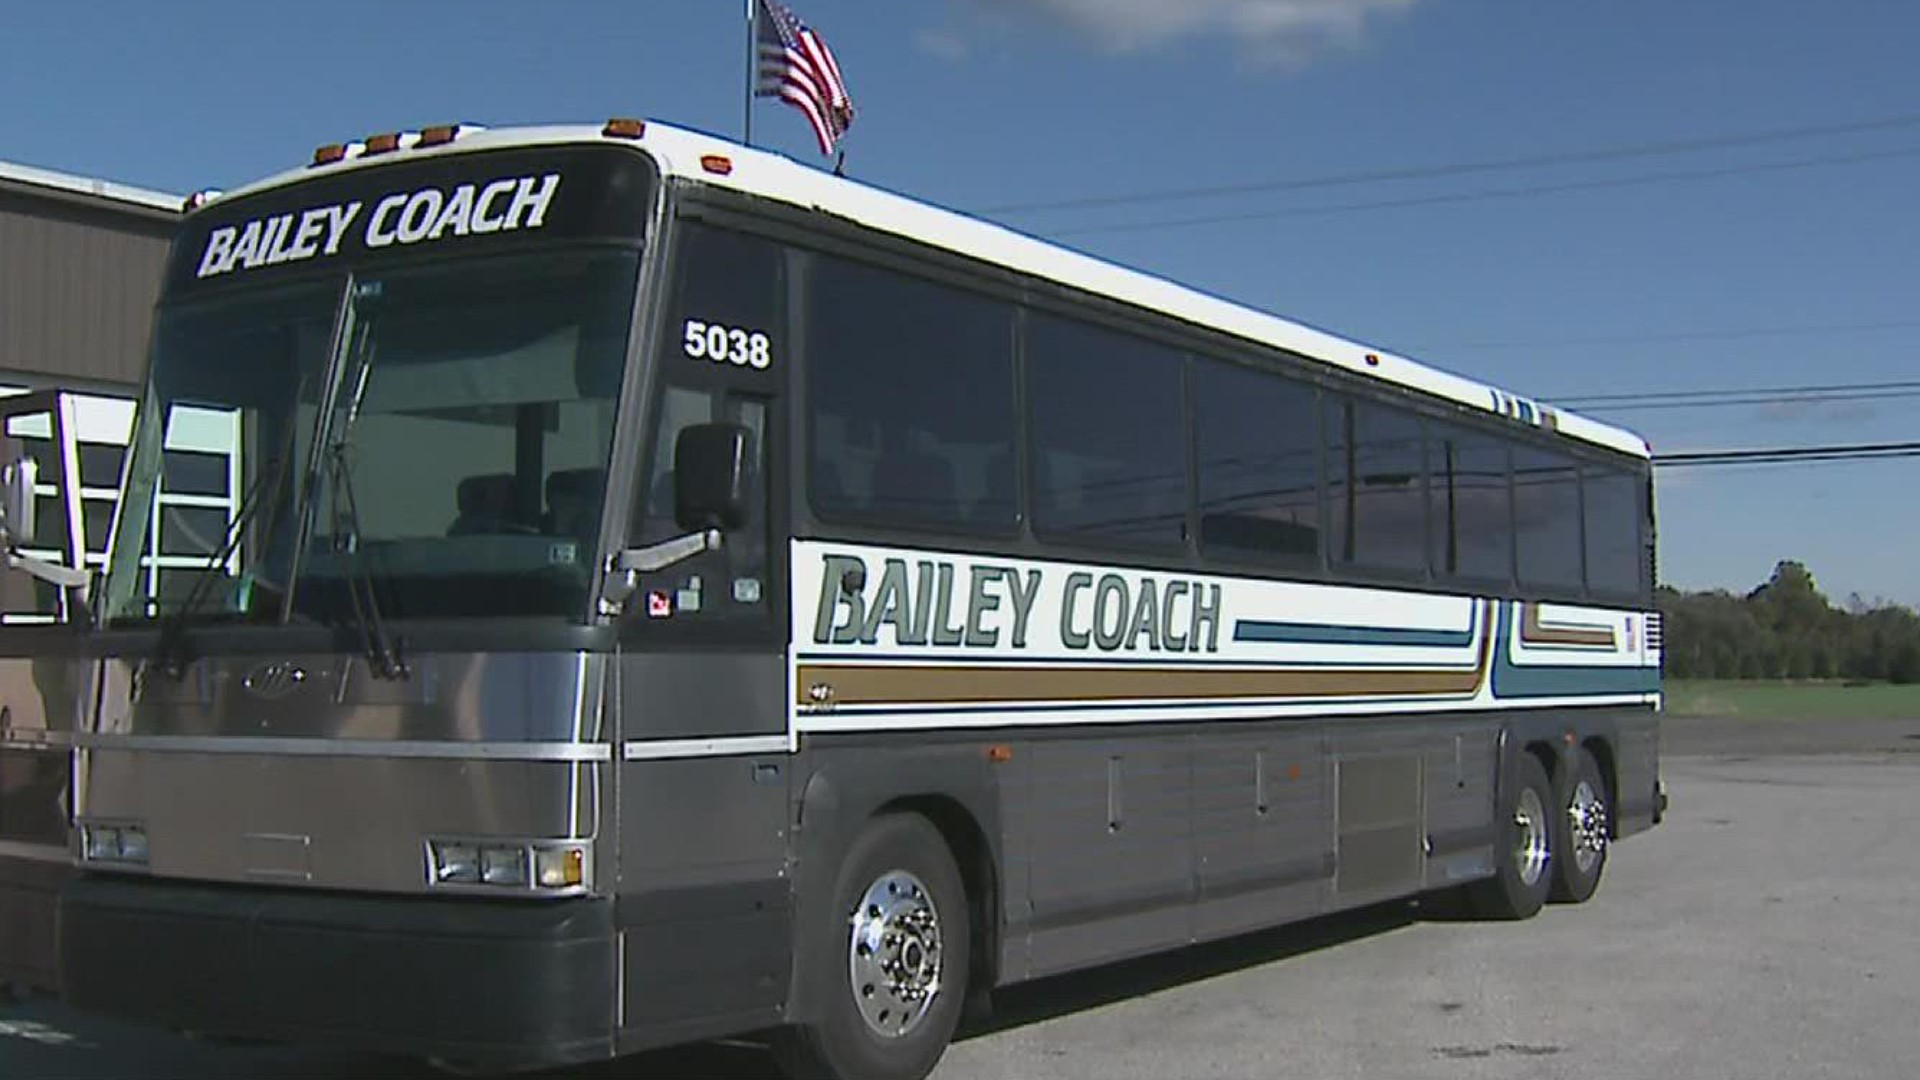 Three local non-profit organizations are in the running to win a 47-passenger bus